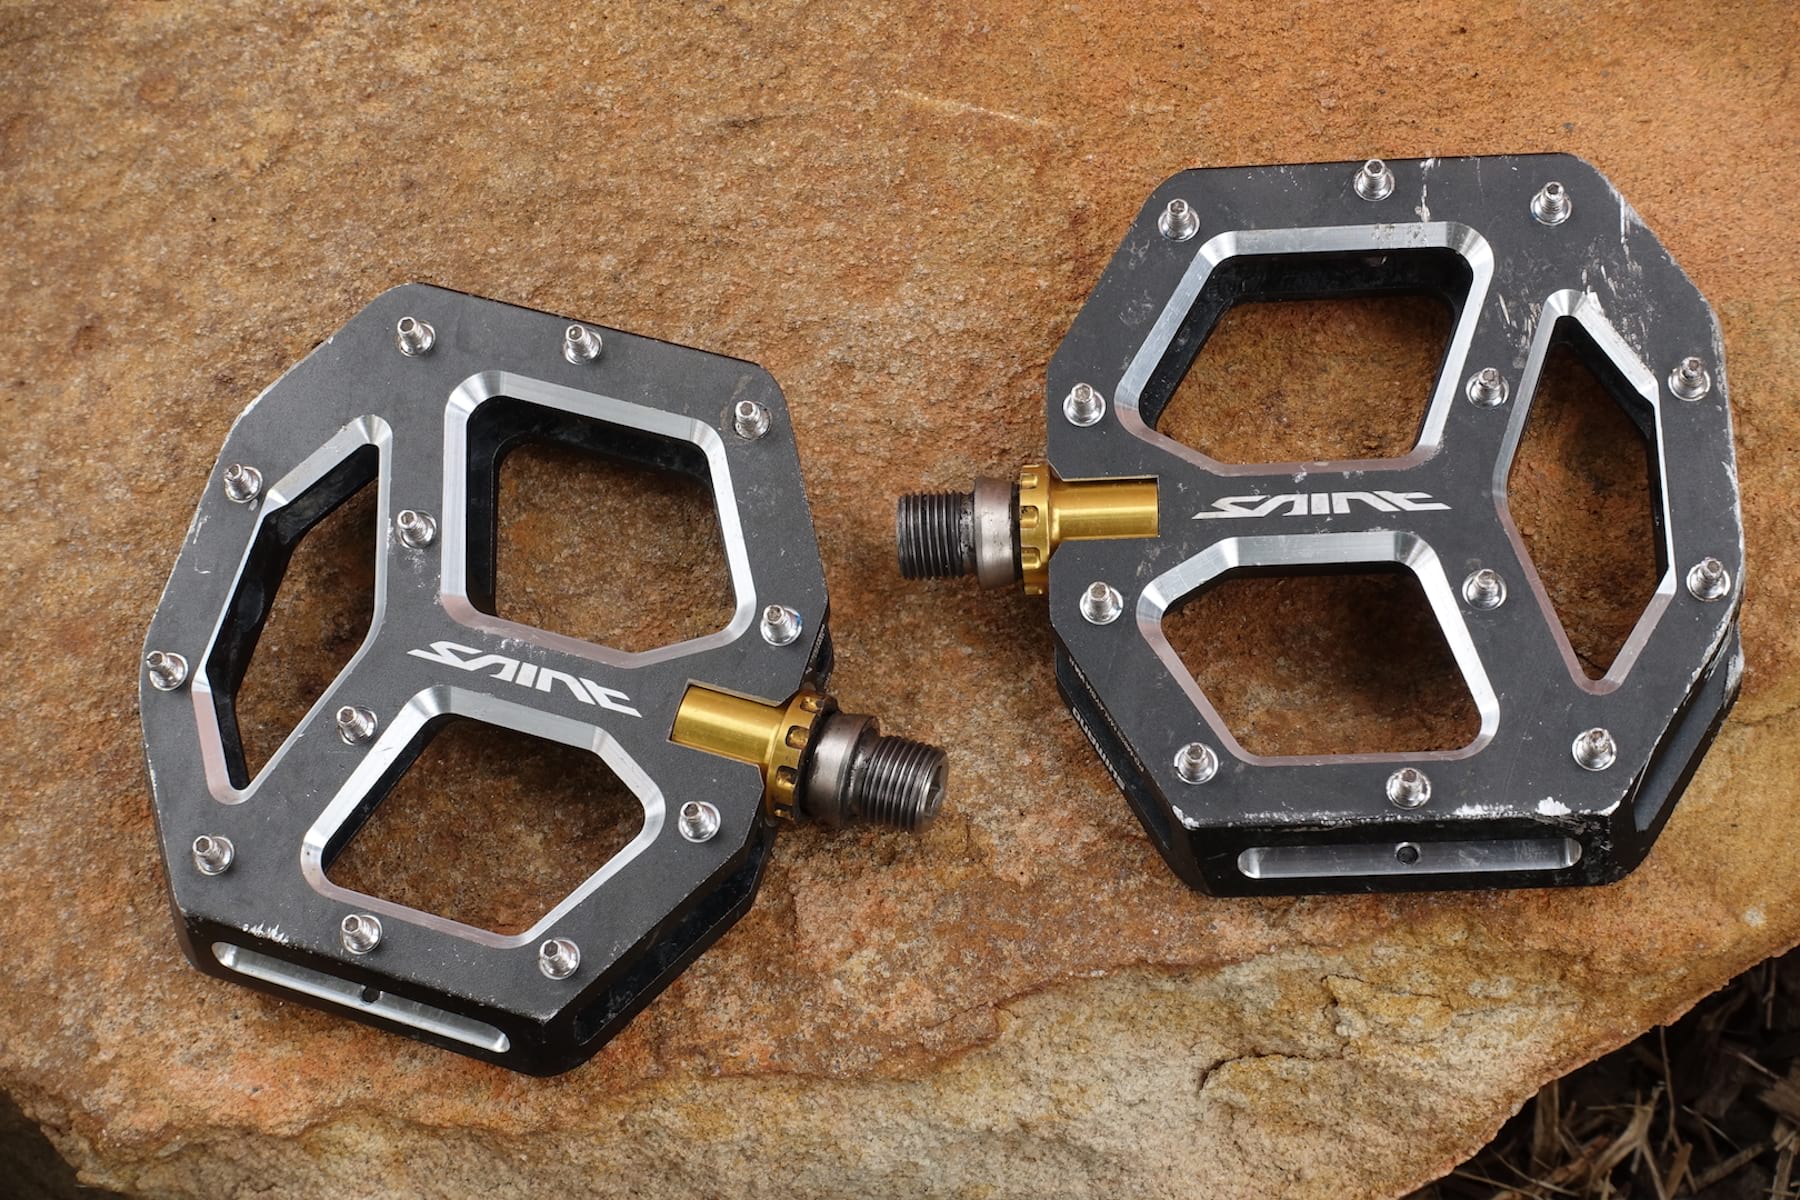 Privilegium Billy Perioperativ periode Review | Shimano goes for mega bearing durability with the tough-as Saint  M828 flat pedals - Singletrack World Magazine